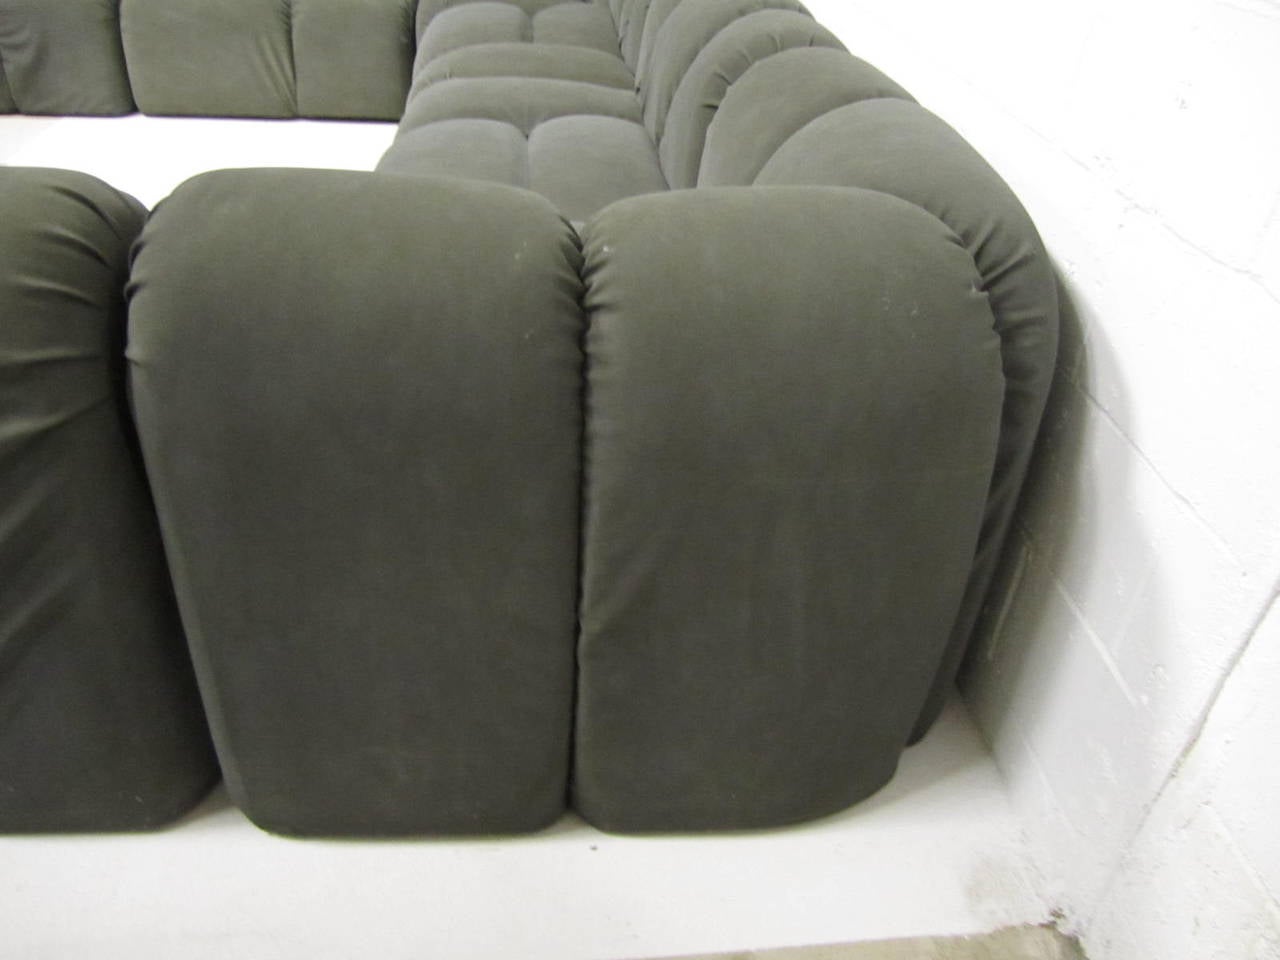 Amazing super rare seven-piece sectional sofa by Paul Evans. Unusual large random tubular tufted sections give this huge sofa a fabulous modern overall look. Upholstered in the first version of ultrasuede in a dark grey-still very comfortable. This